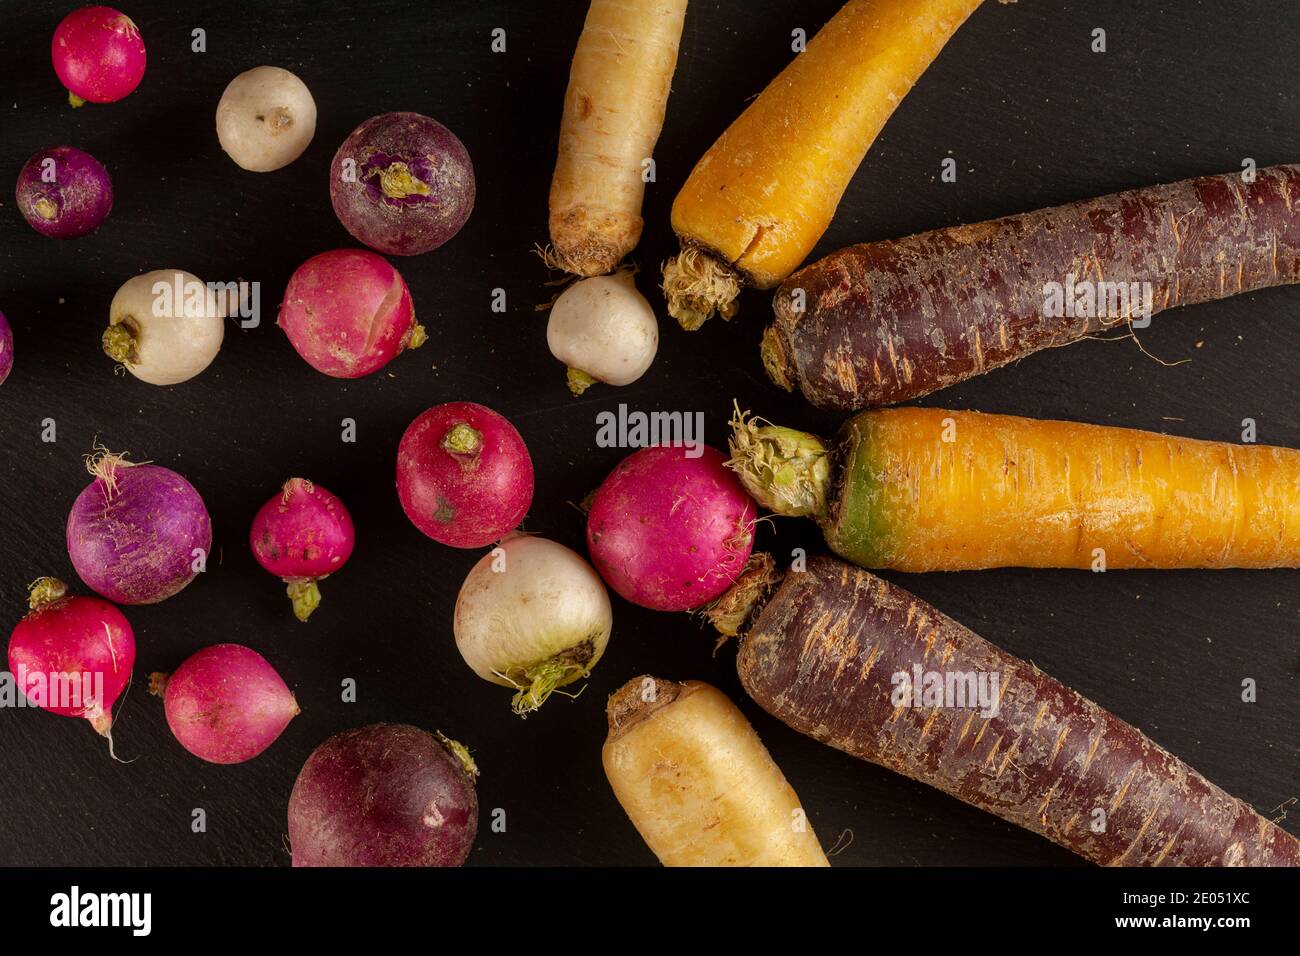 A colorful assortment of root vegetables (carrots, beetroots, turnips) arranged on black background in a stylish way. A versatile image for vegan fibe Stock Photo